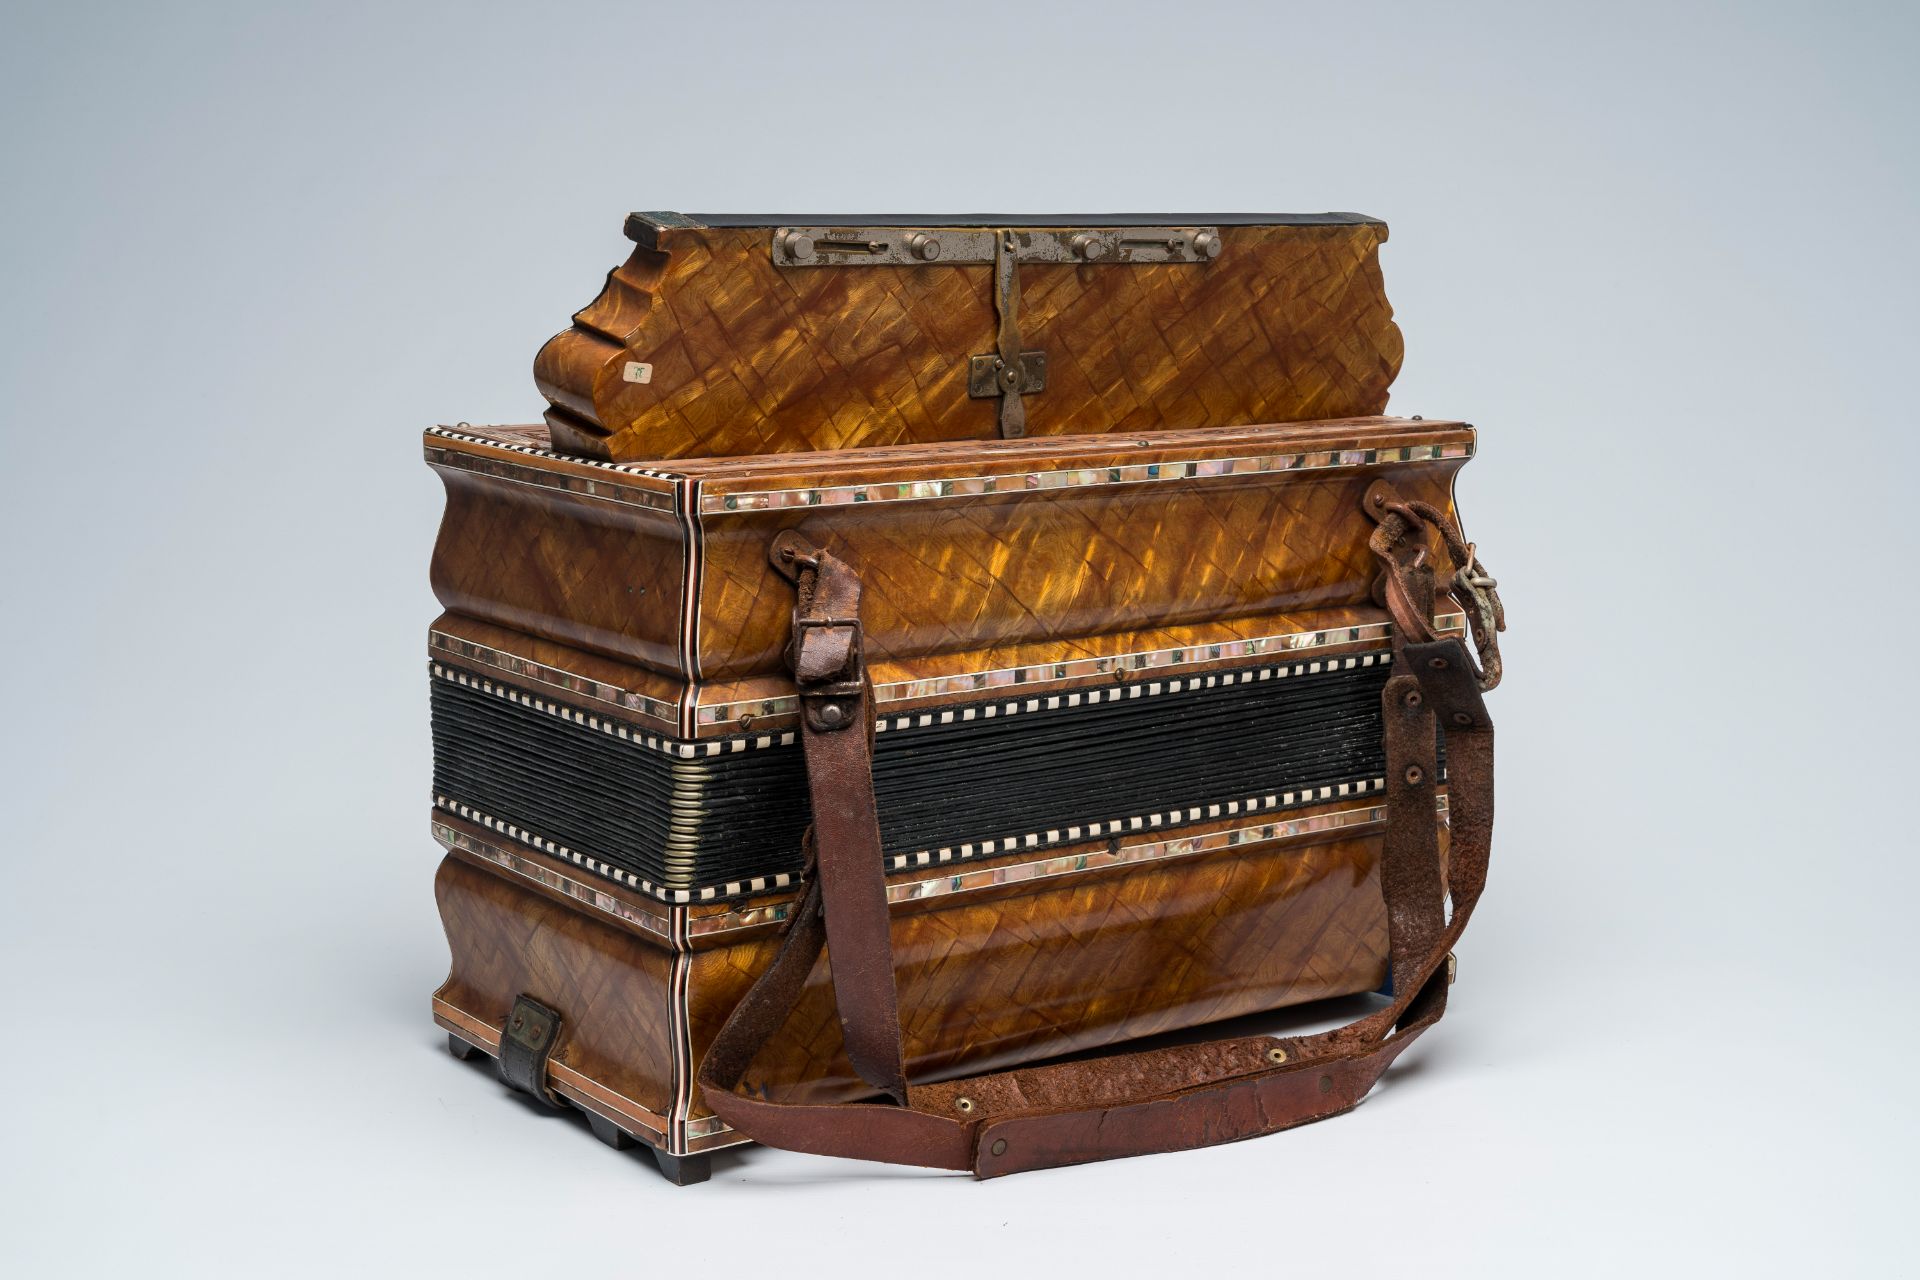 A Belgian 'August De Waele' chromatic accordion with button keyboard, ca. 1920 - Image 3 of 5